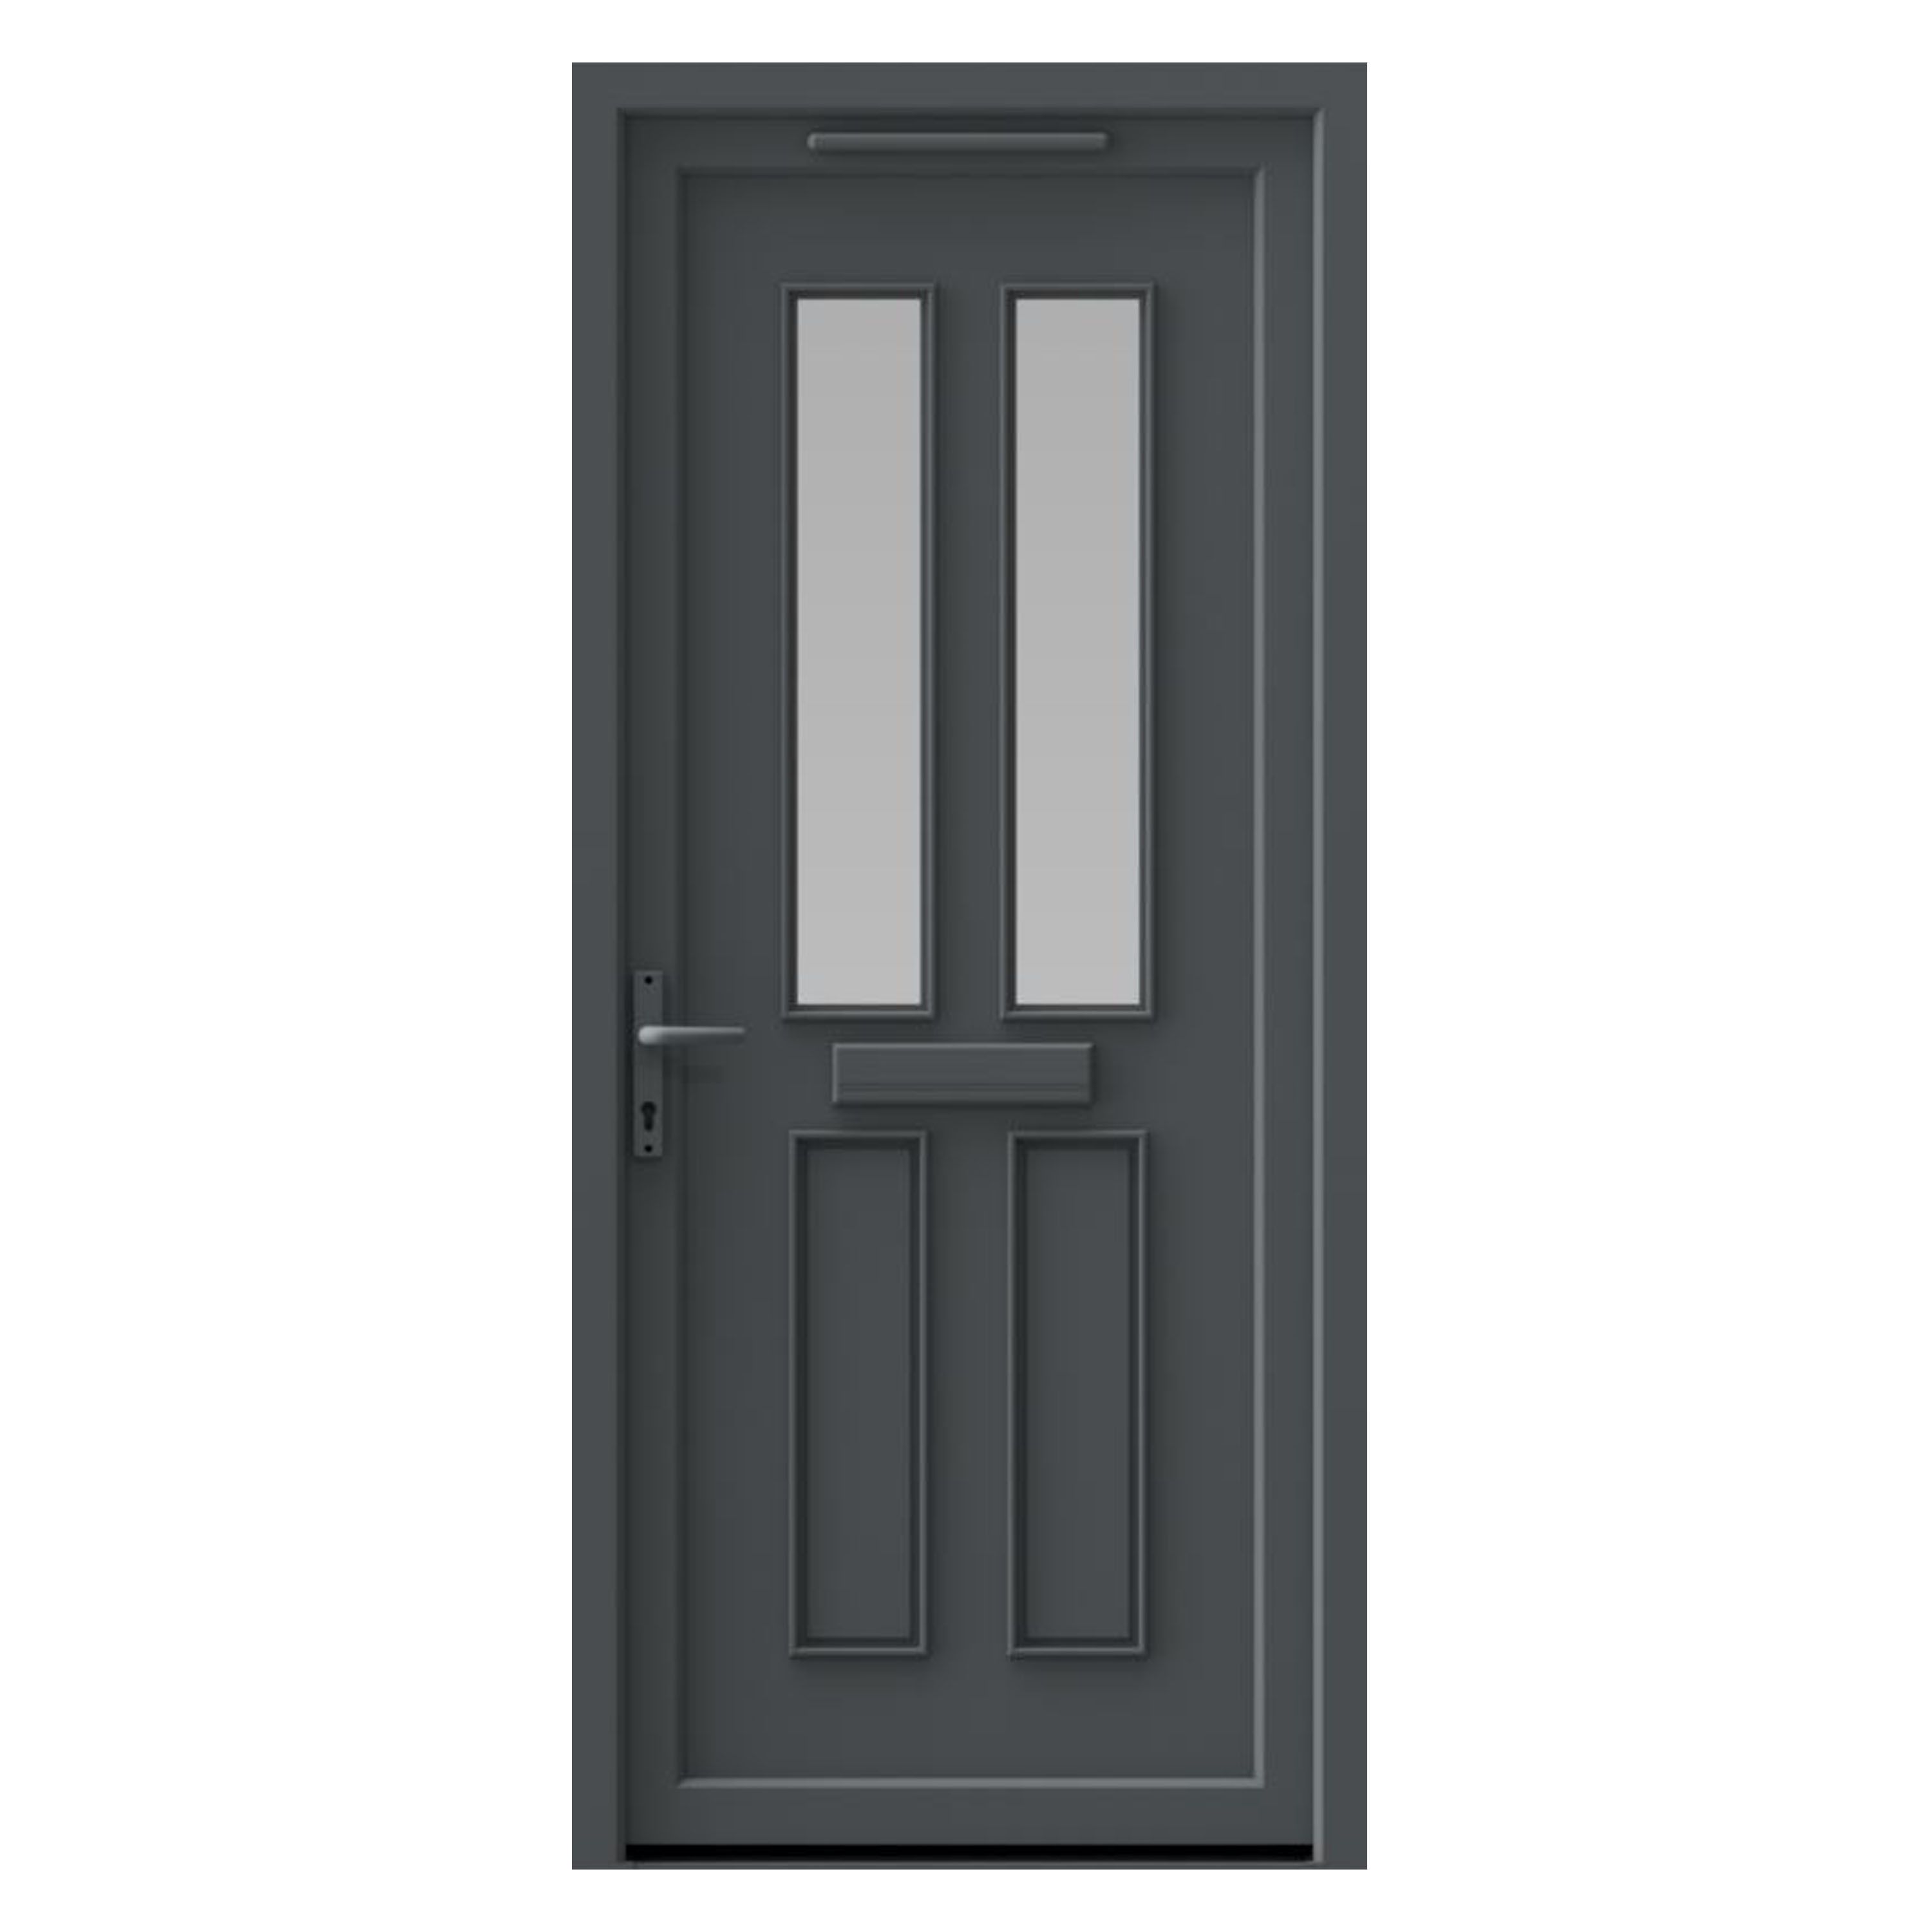 Fortia Chesil Frosted Glazed Anthracite RH External Front Door set, (H)2085mm (W)920mm